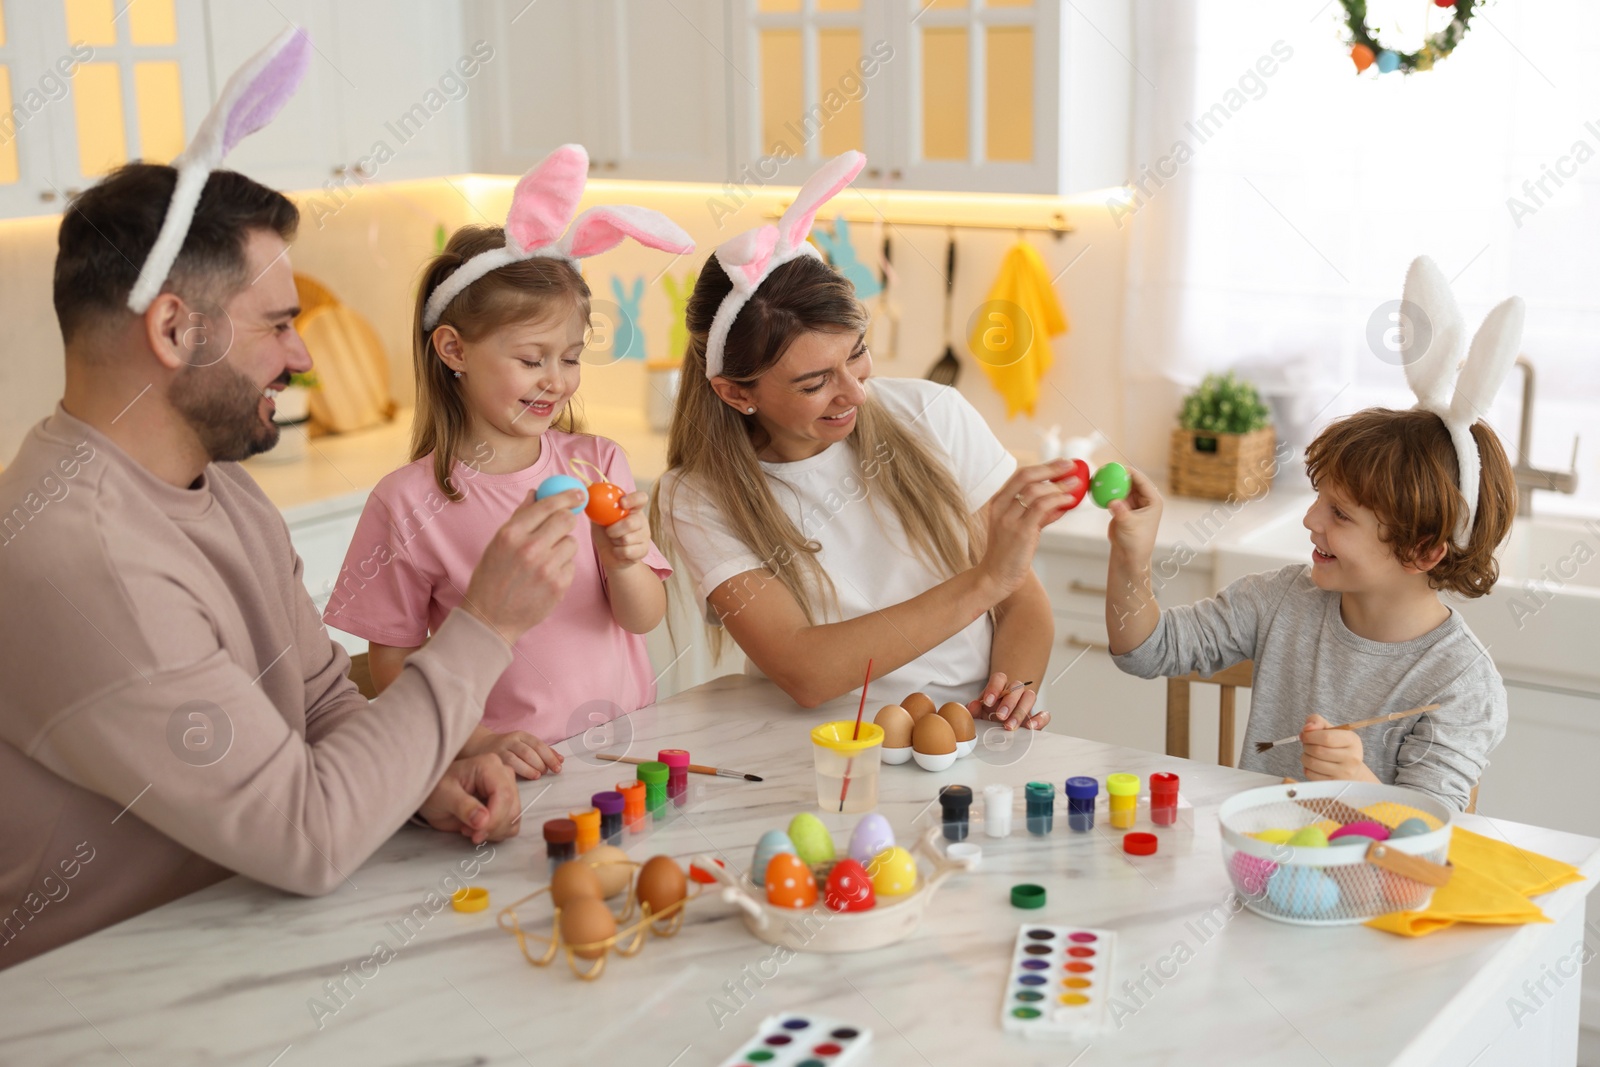 Photo of Easter celebration. Happy family with bunny ears having fun while painting eggs at white marble table in kitchen